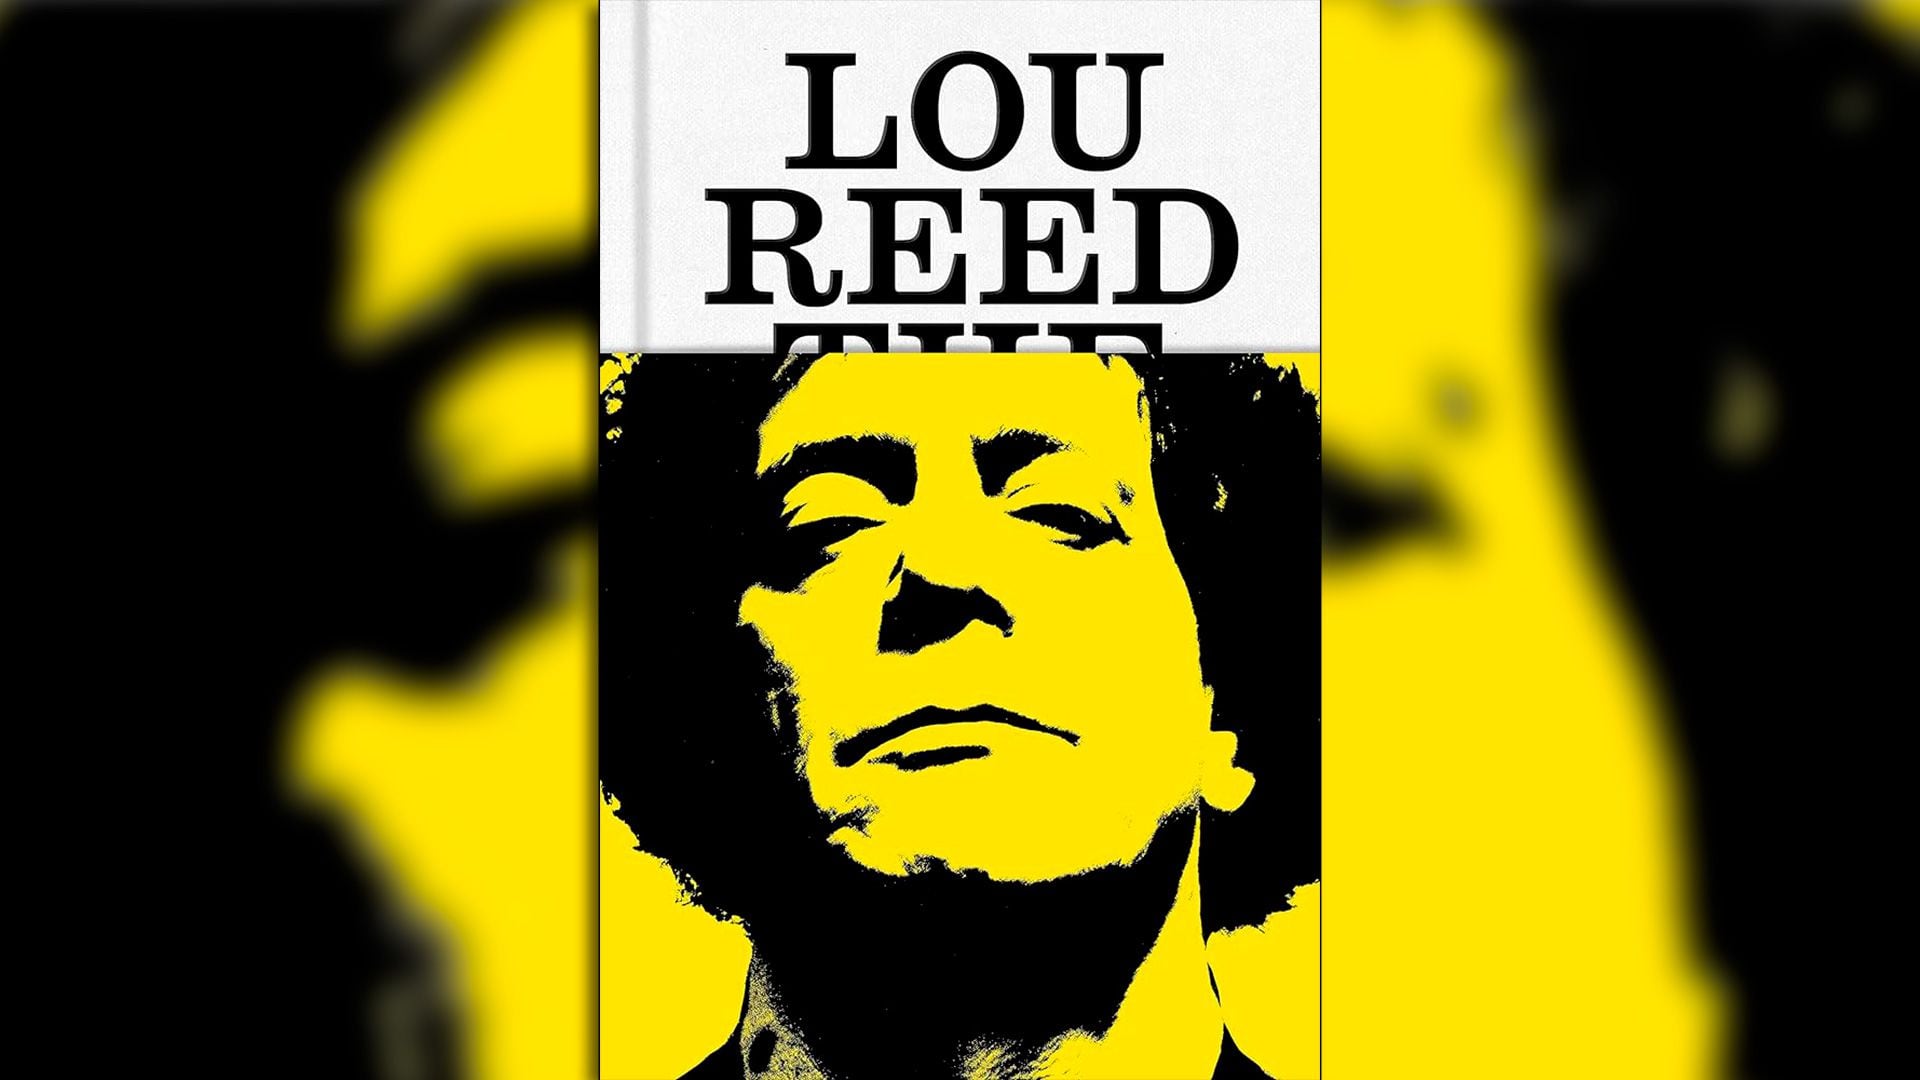 "Lou Reed: The King of New York".